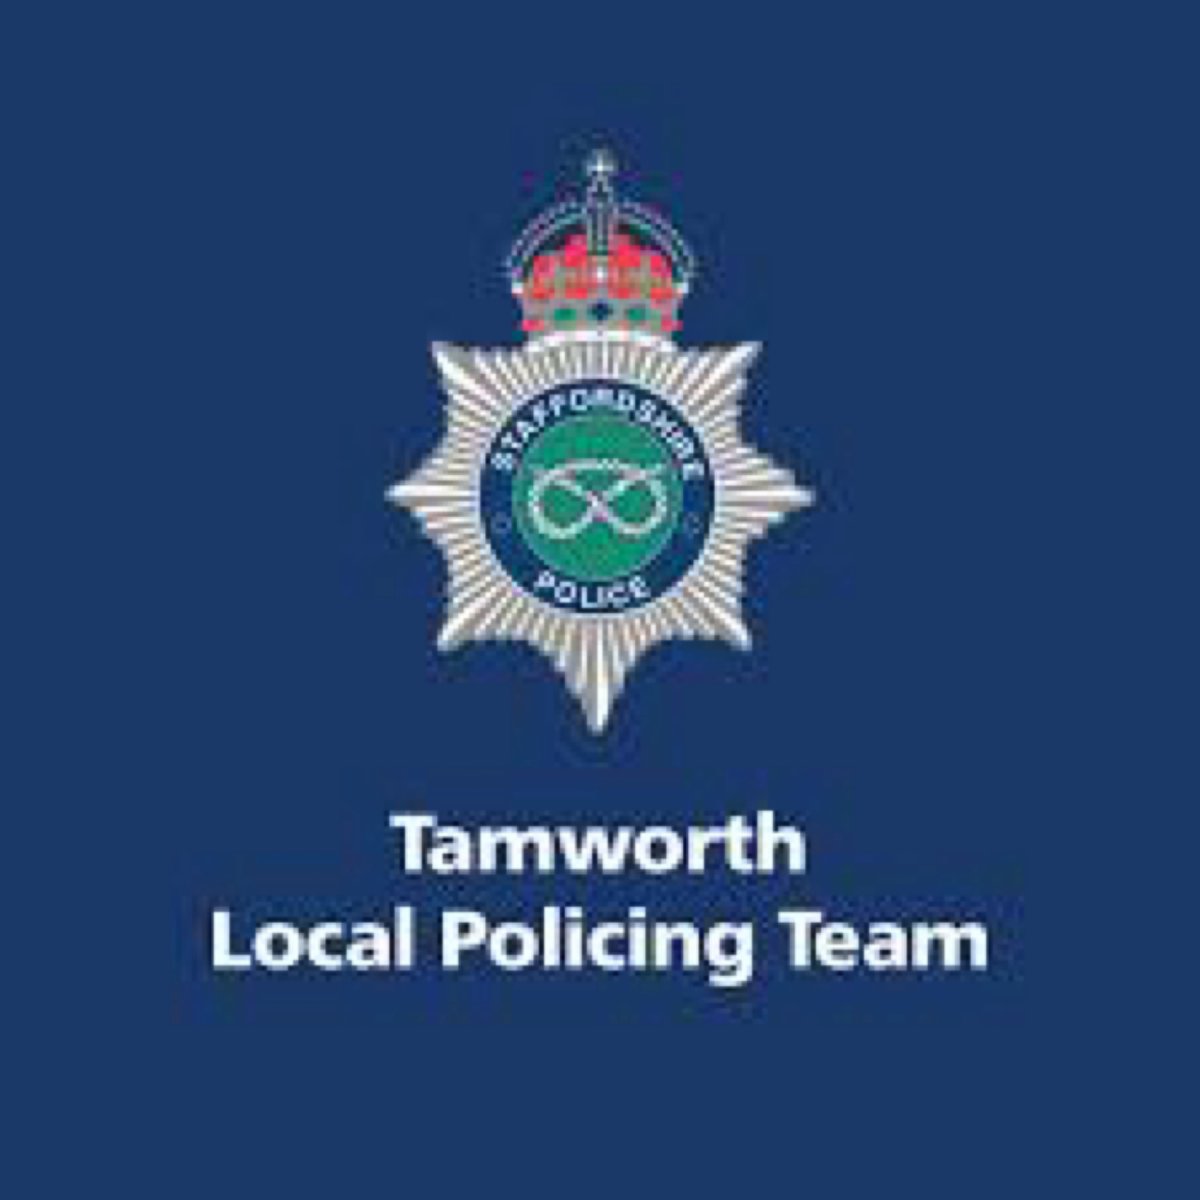 Last night @TamworthPolice had 6 SC'S on duty supporting the #SaferNights operation including licensed premises checks with @TamworthCouncil They also responded to reports of an assault on door staff. With assistance from PCSO’s a male was quickly located & arrested by the SC’s